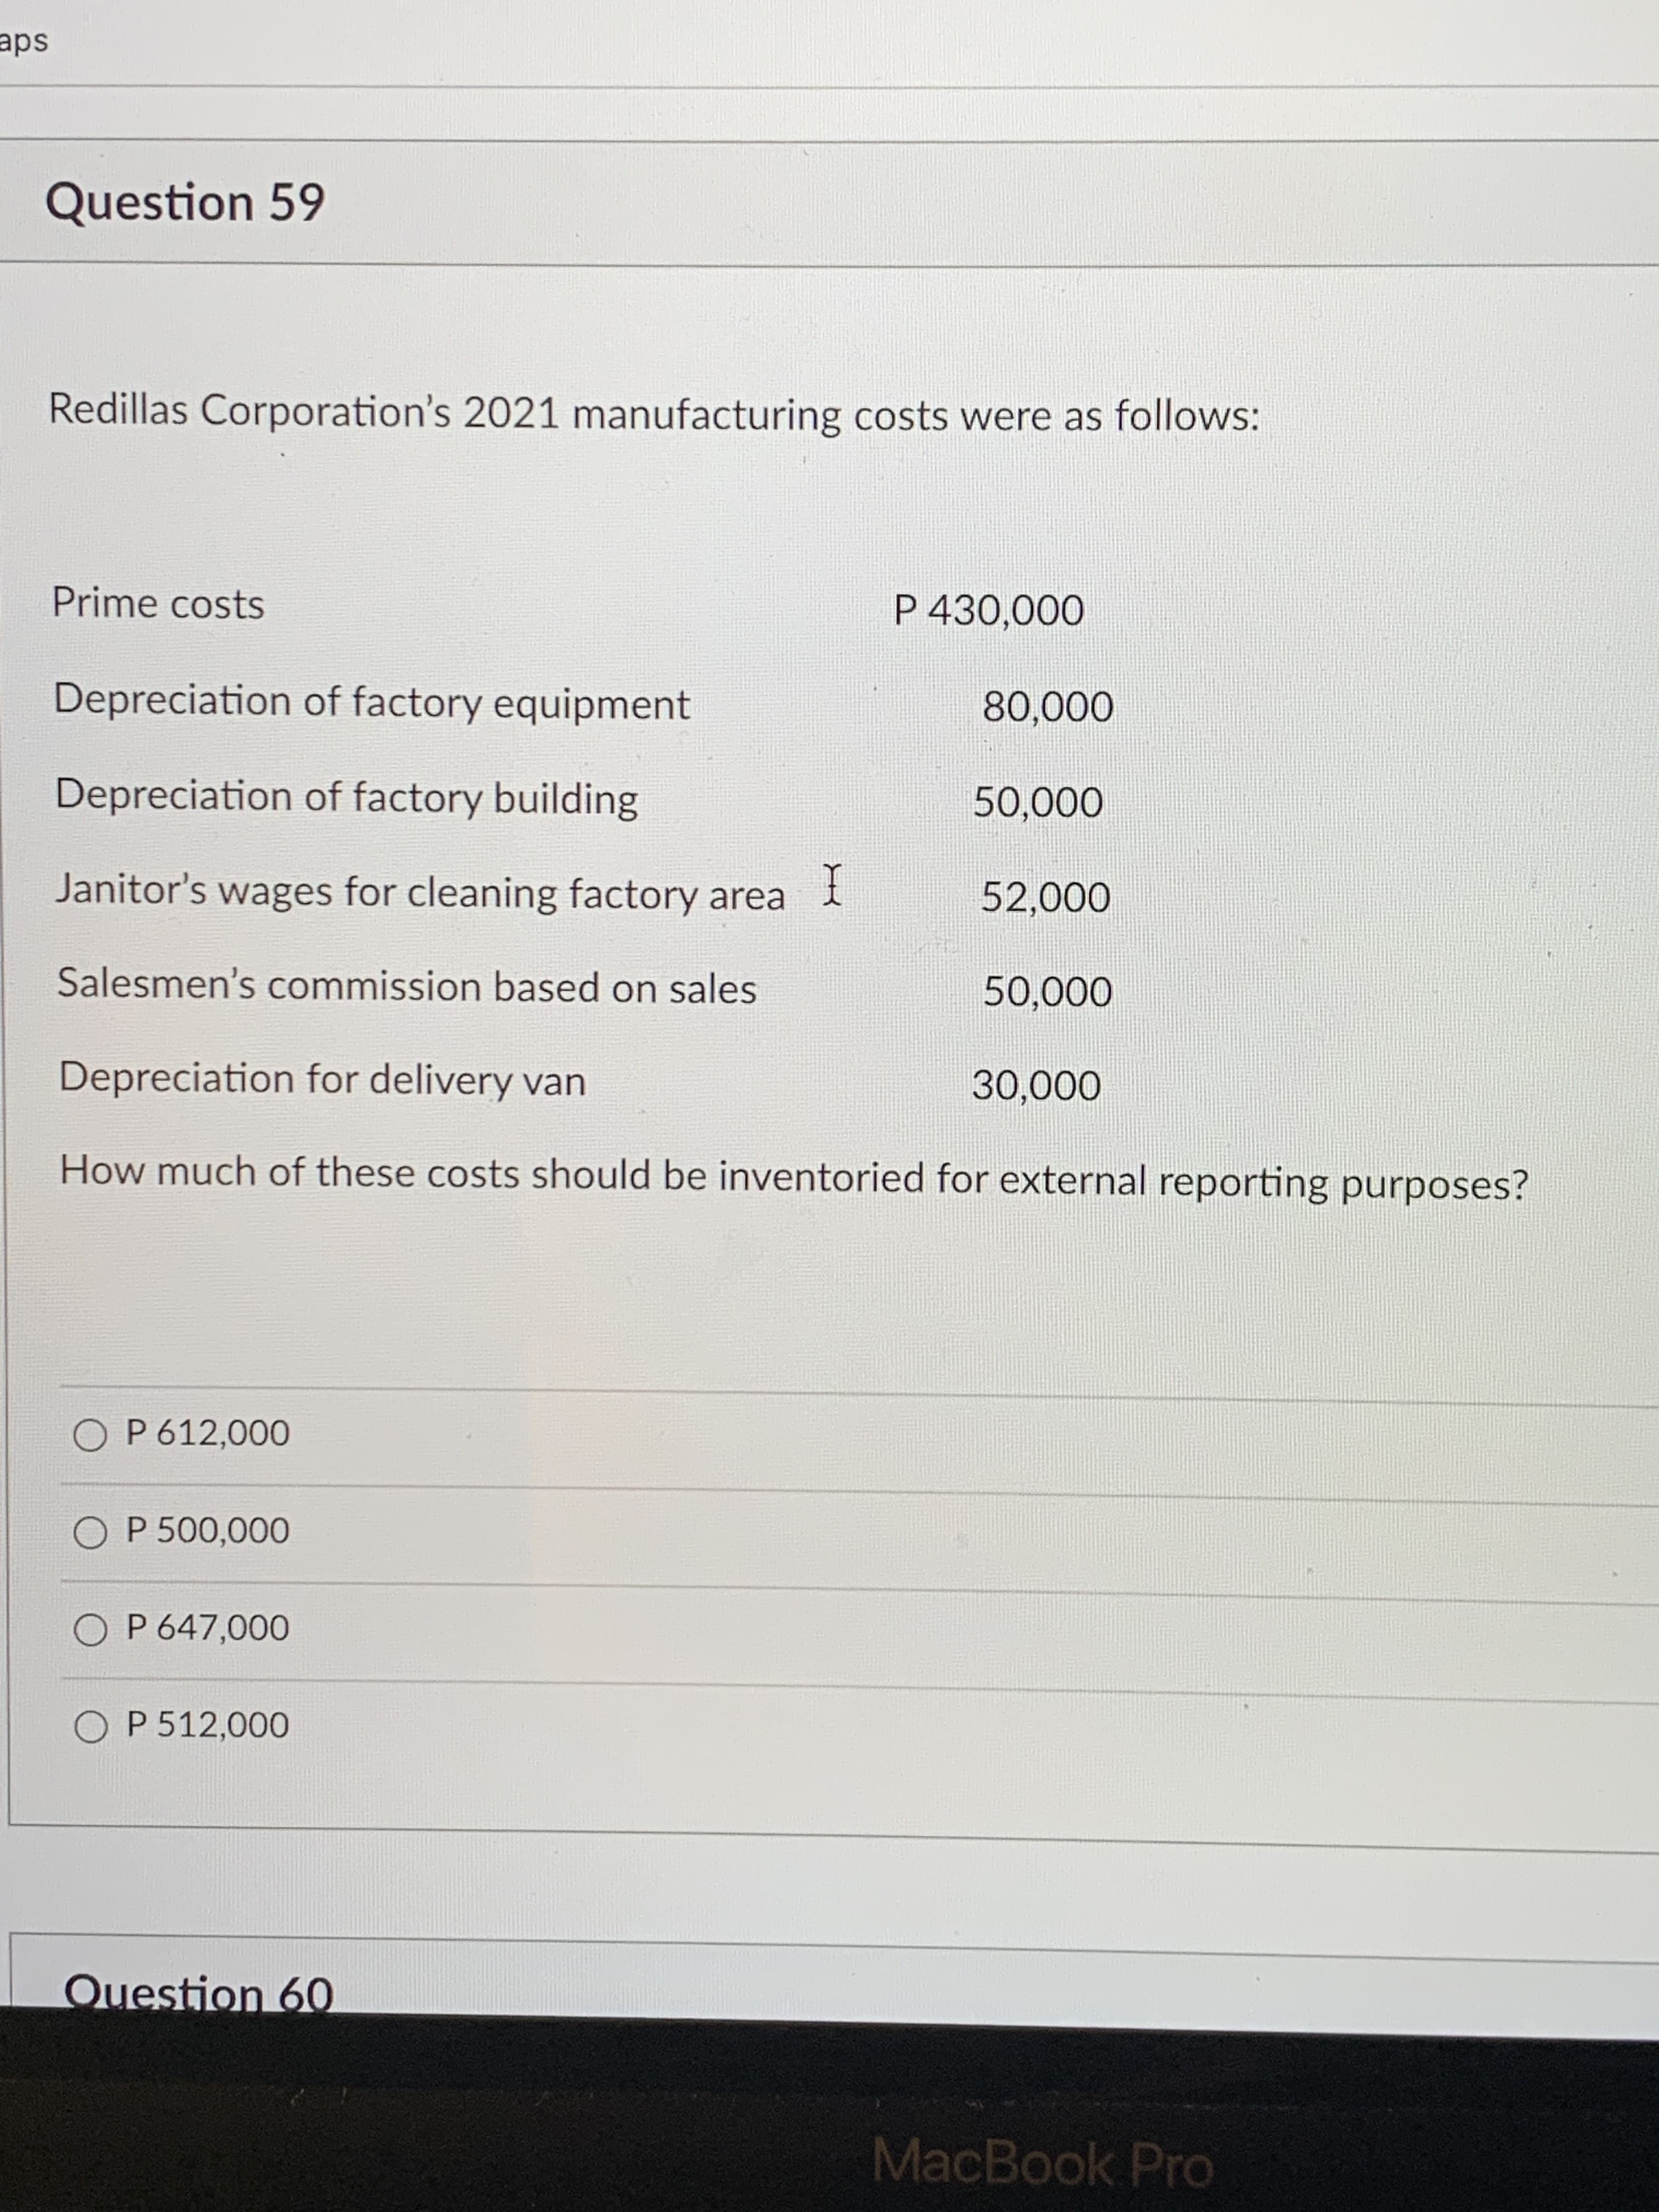 Question 59
Redillas Corporation's 2021 manufacturing costs were as follows:
Prime costs
P 430,000
Depreciation of factory equipment
Depreciation of factory building
000'00
I
Janitor's wages for cleaning factory area i
000'
Salesmen's commission based on sales
Depreciation for delivery van
How much of these costs should be inventoried for external reporting purposes?
O P 612,000
O P 500,000
O P 647,000
O P 512,000
Question 6O
MacBook Pro
